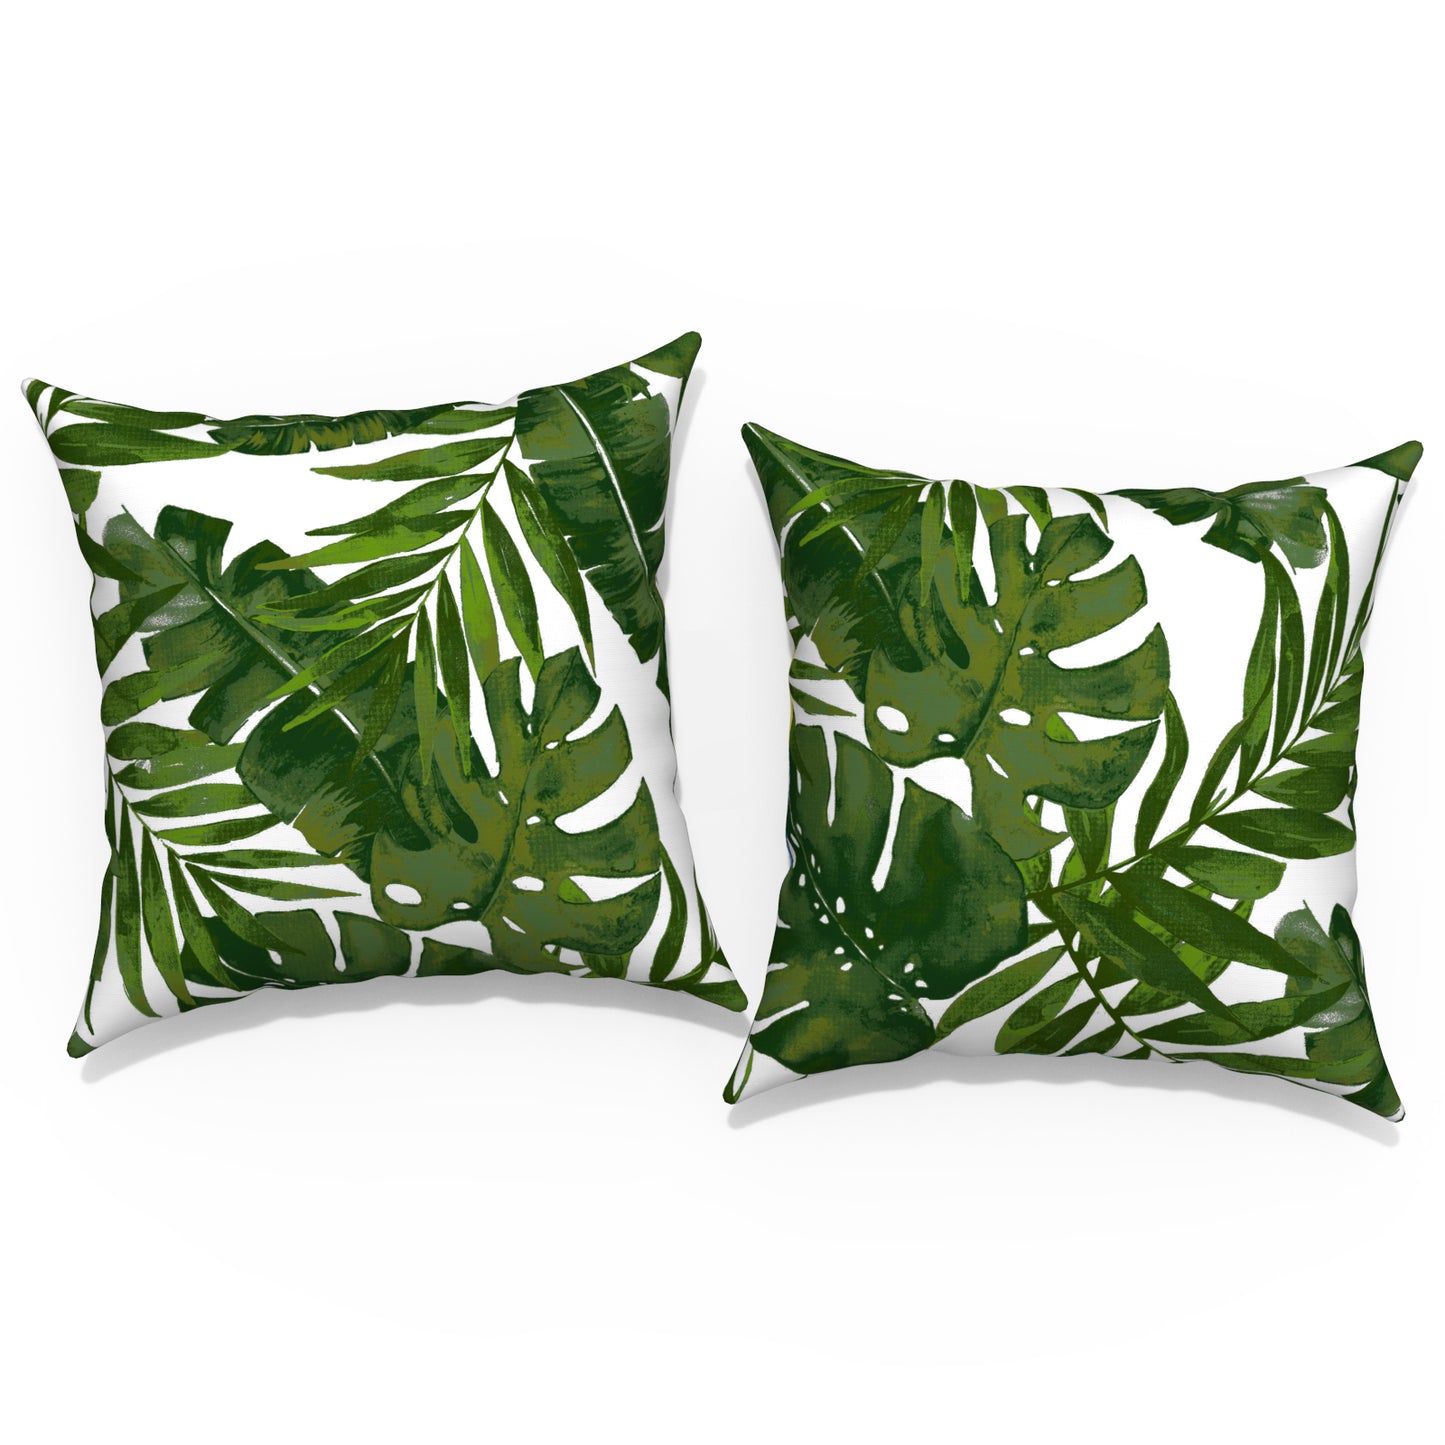 Melody Elephant Outdoor Throw Pillows 16x16 Inch, water Repellent patio pillows with Inners set of 2, outdoor pillows for patio furniture home garden, Palm Green